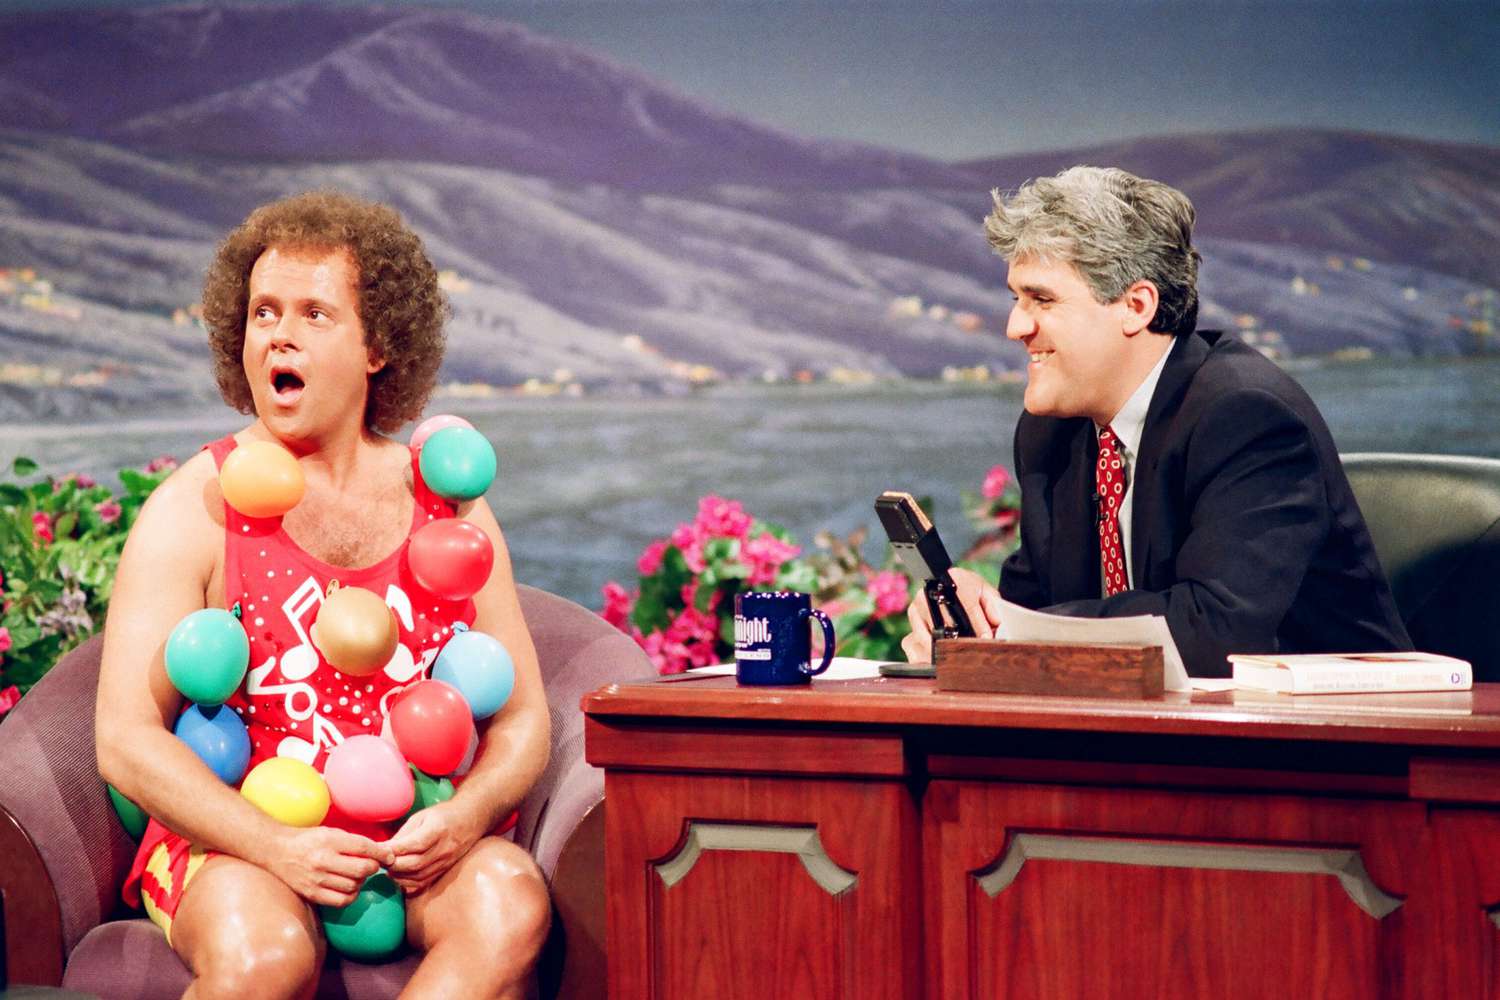 Richard Simmons with Jay Leno on The Tonight Show With Jay Leno on July 12, 1993